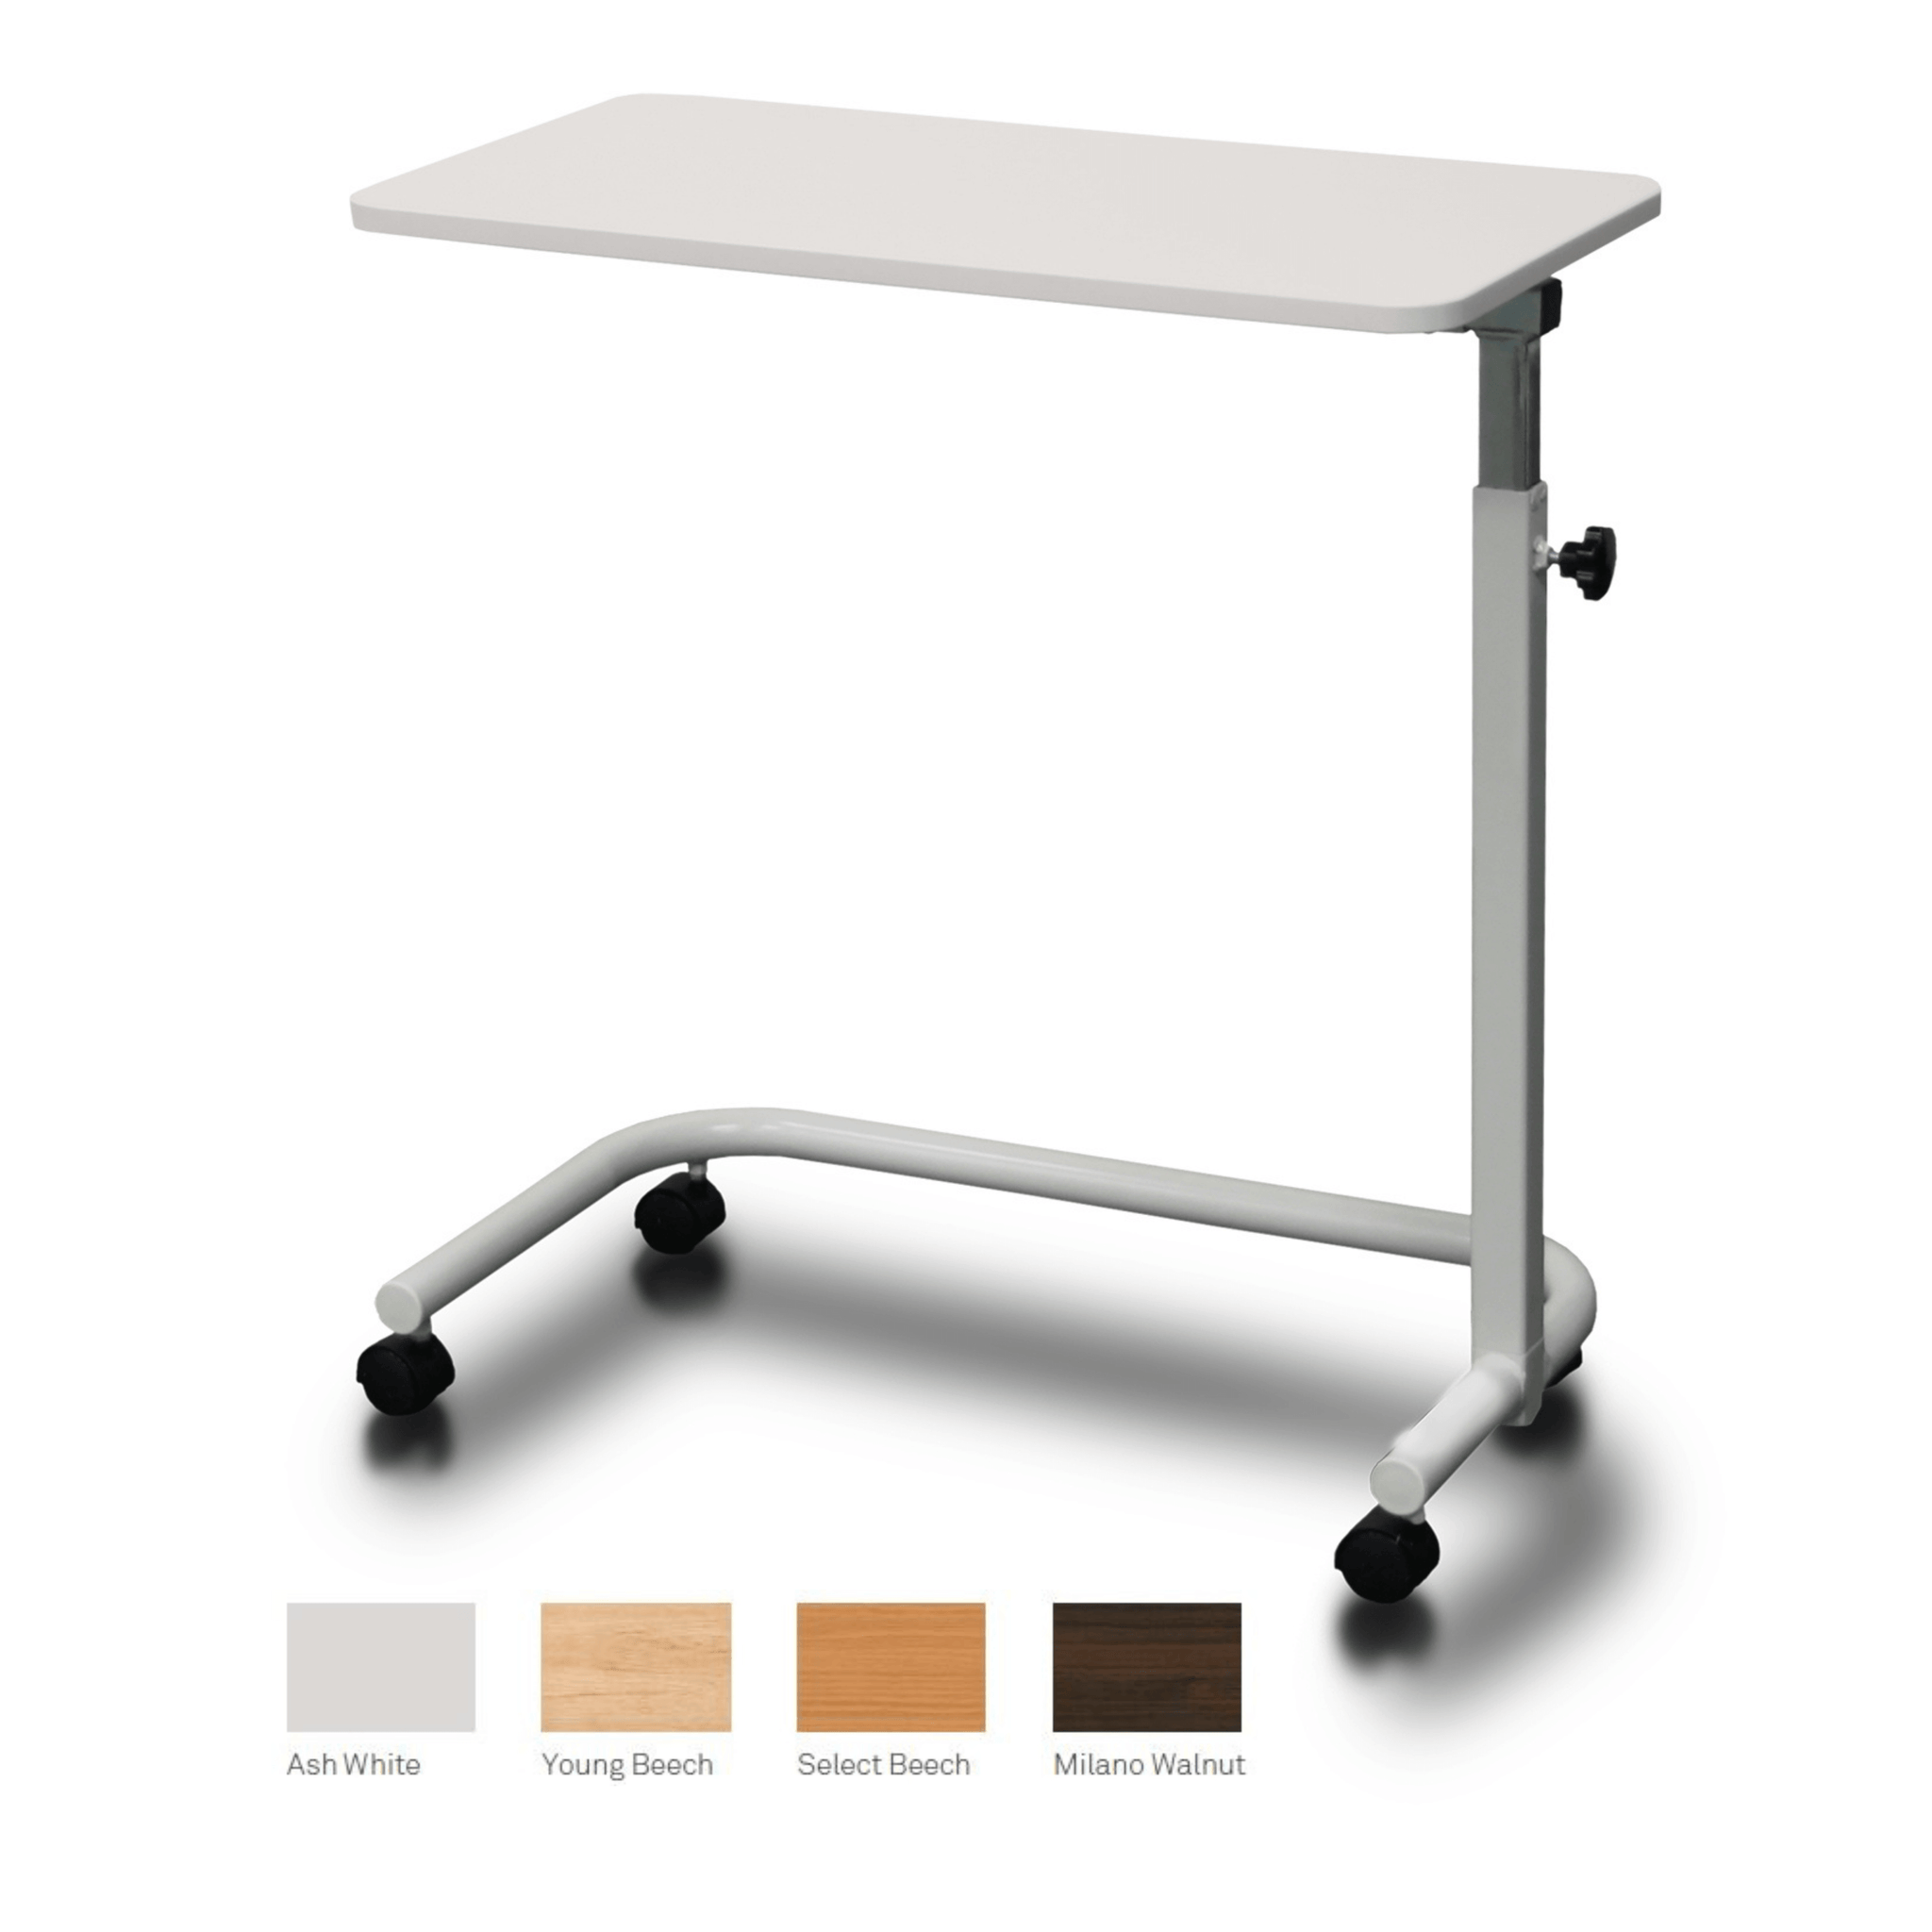 Fixed Top Overbed Table - Manual Height Adjustment, Ash White